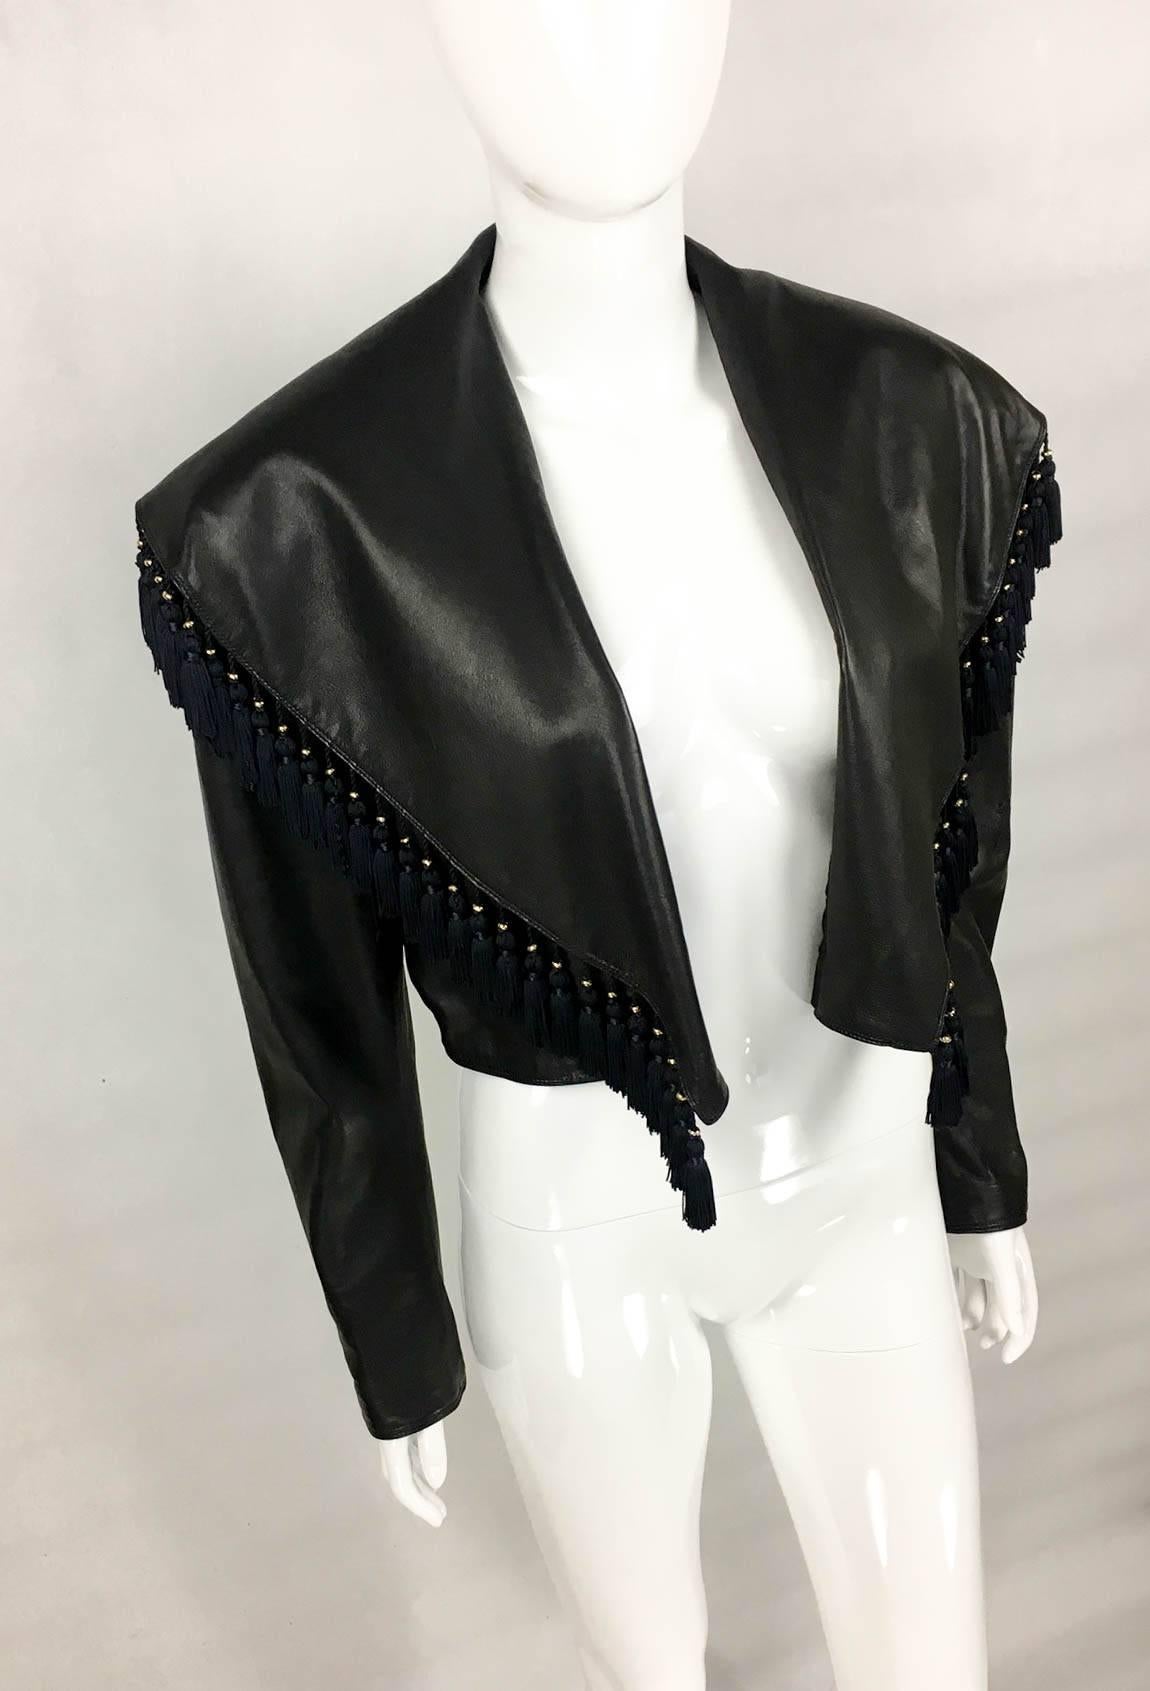 Women's Gianni Versace Black Leather Jacket With Tassel Embellished Collar, 1980s